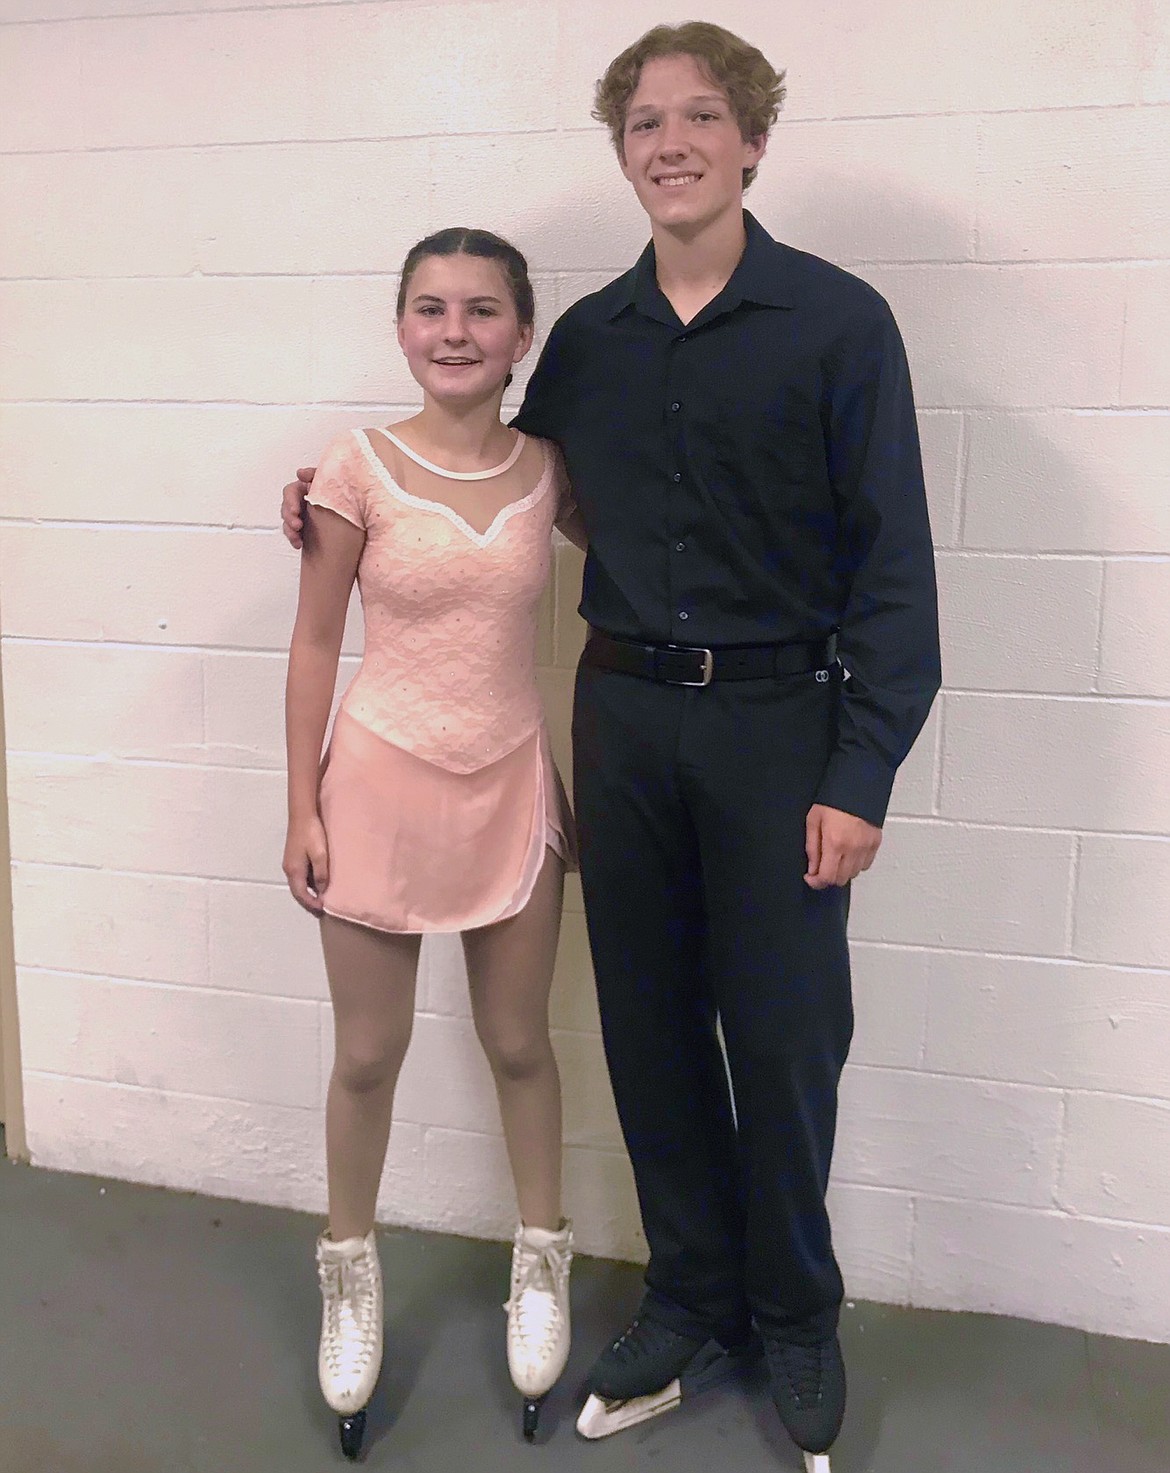 A pairs team, Jade Denker, 13, and Willem Gray, 16, from Glacier Skate Academy recently passed the Pre-Juvenile Pairs US Figure Skating test. This is the first pairs team from the Flathead Valley to pass this skill level testing. (Photo provided by Kristin Cowan)